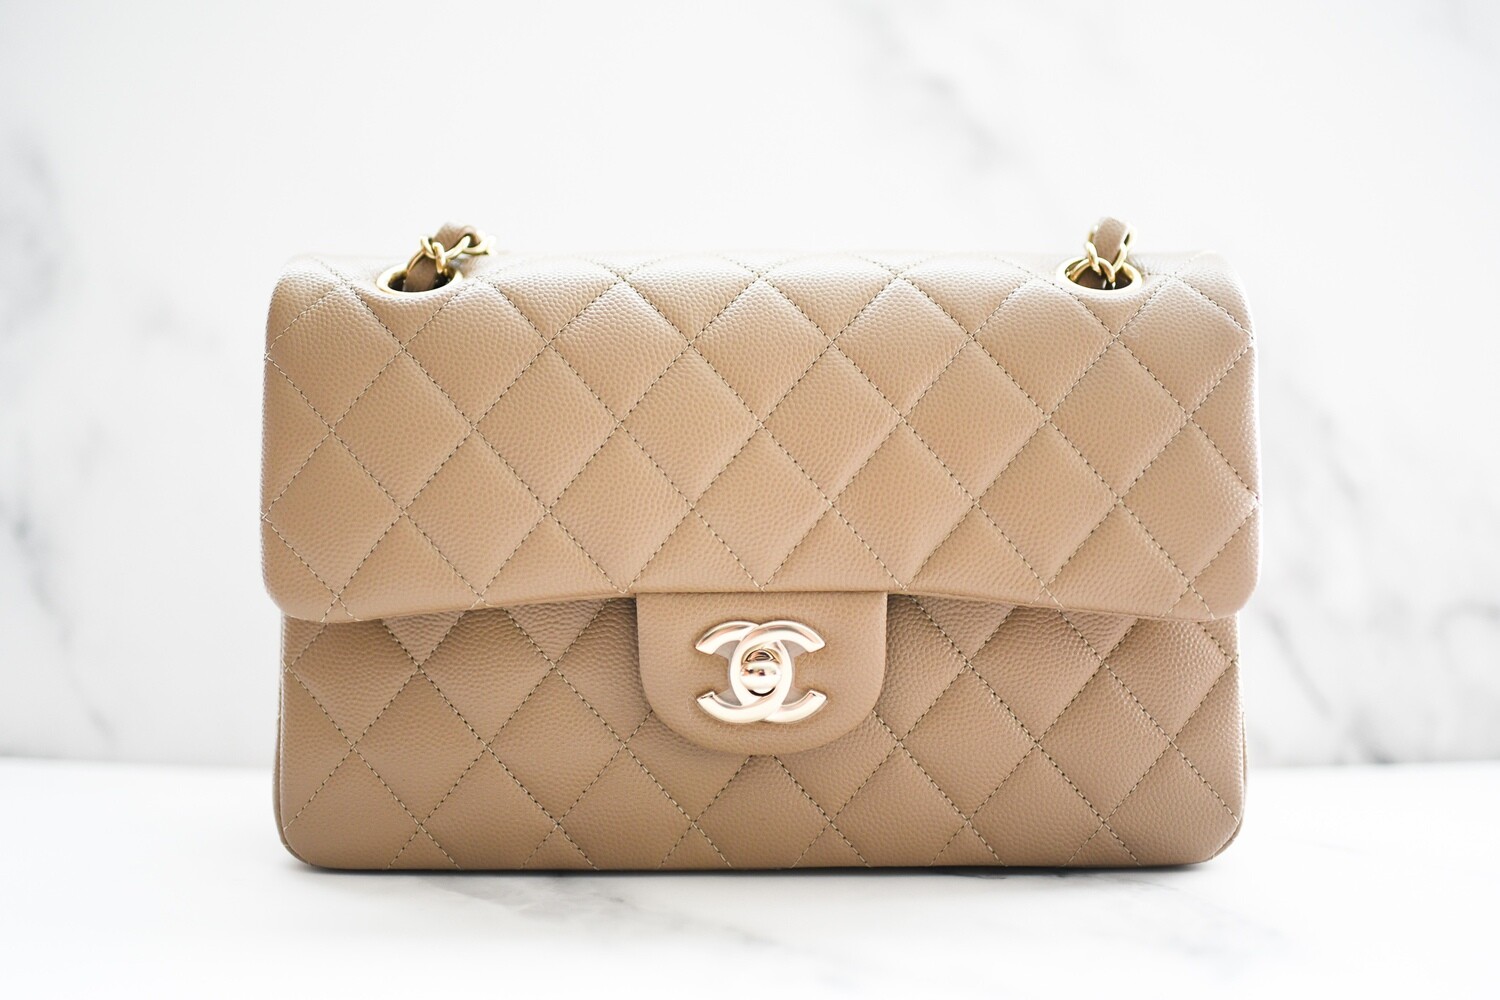 Chanel Classic Flap, 22A Dark Beige Caviar Leather with Hardware, New in Box